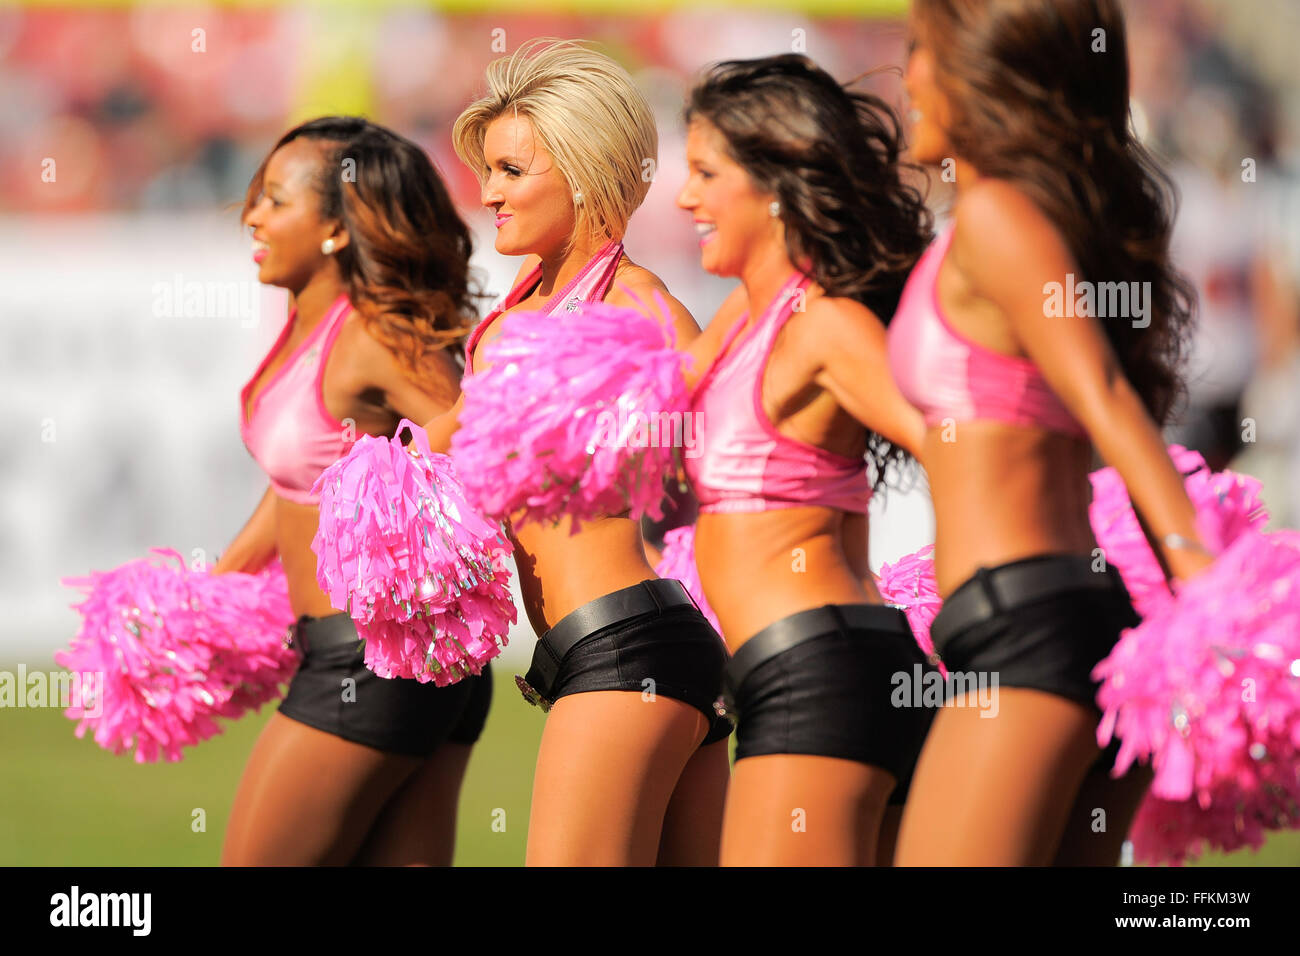 Tampa, FL, USA. 13th Oct, 2013. Tampa Bay Buccaneers cheerleaders wear pink during the Bucs loss to the Philadelphia Eagles 31-20 win on Oct. 13, 2013 in Tampa, Florida. ZUMA PRESS/ Scott A. Miller © Scott A. Miller/ZUMA Wire/Alamy Live News Stock Photo